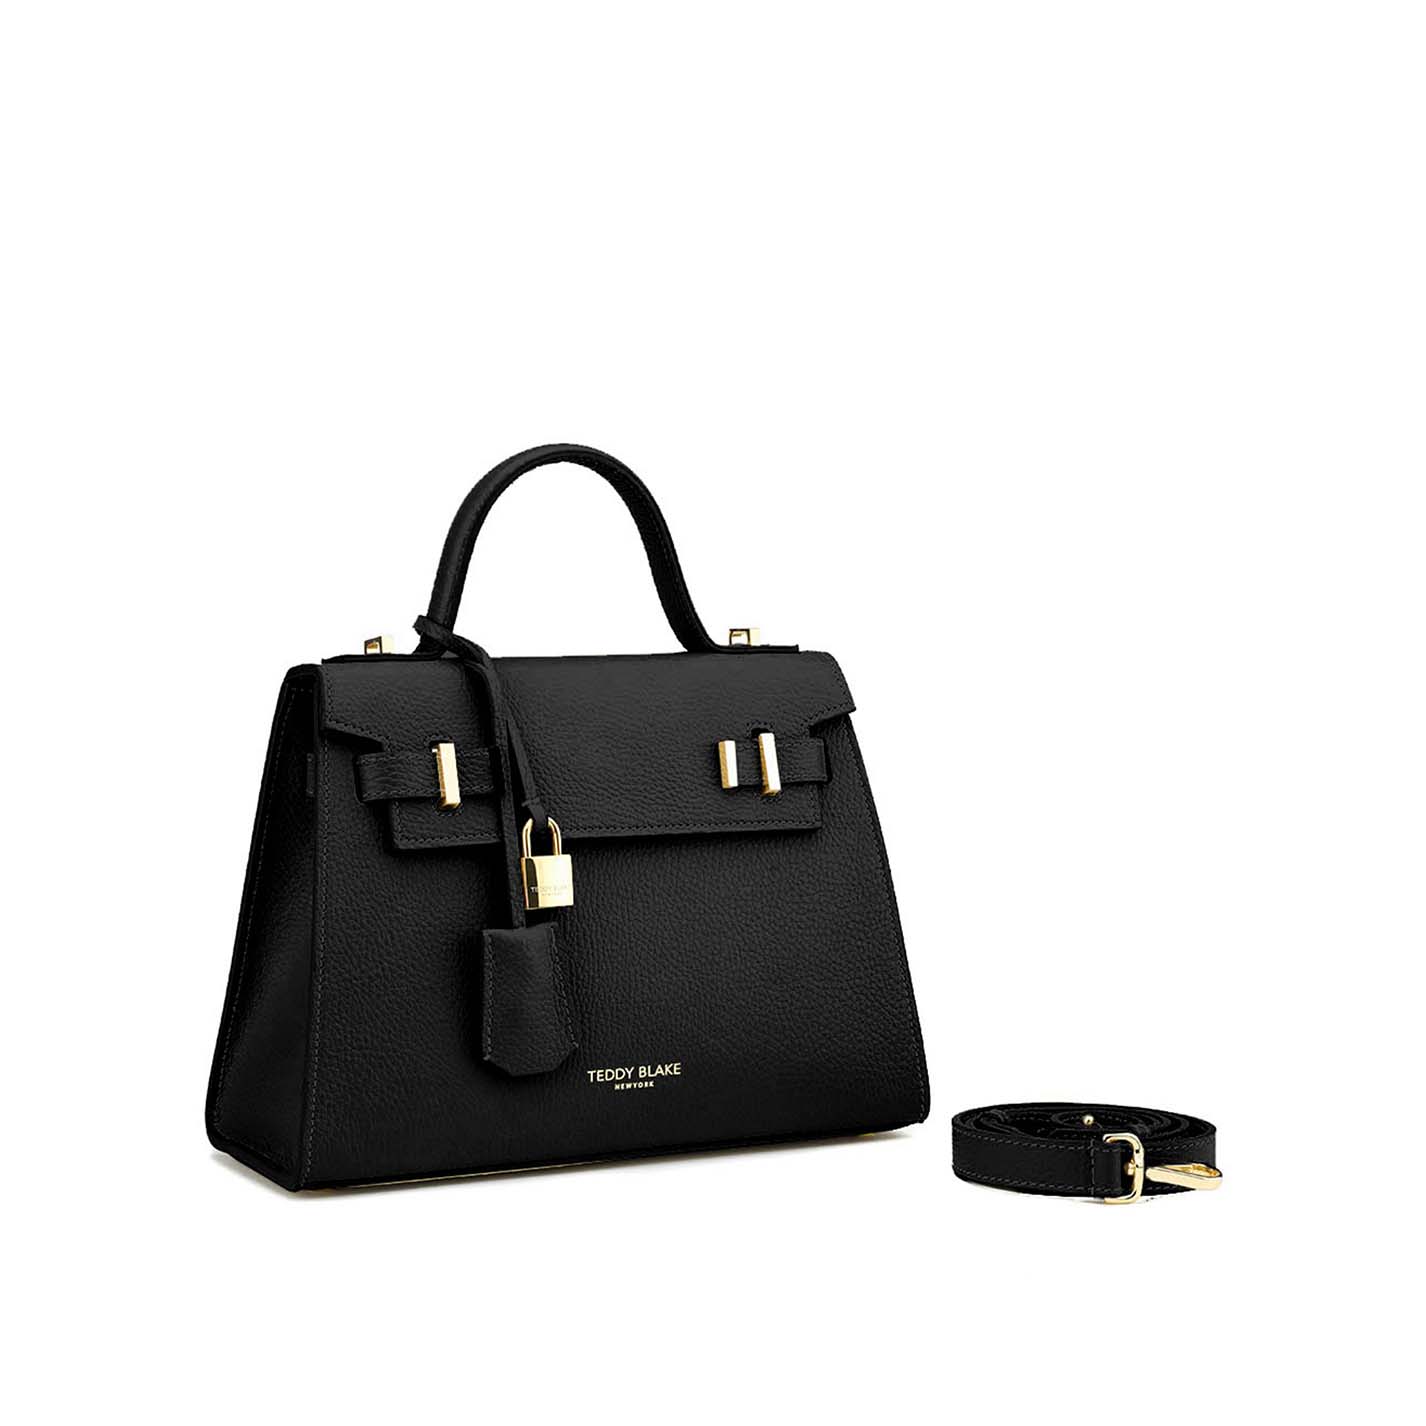 ava-gold-11-black-leather-bag-with-handle